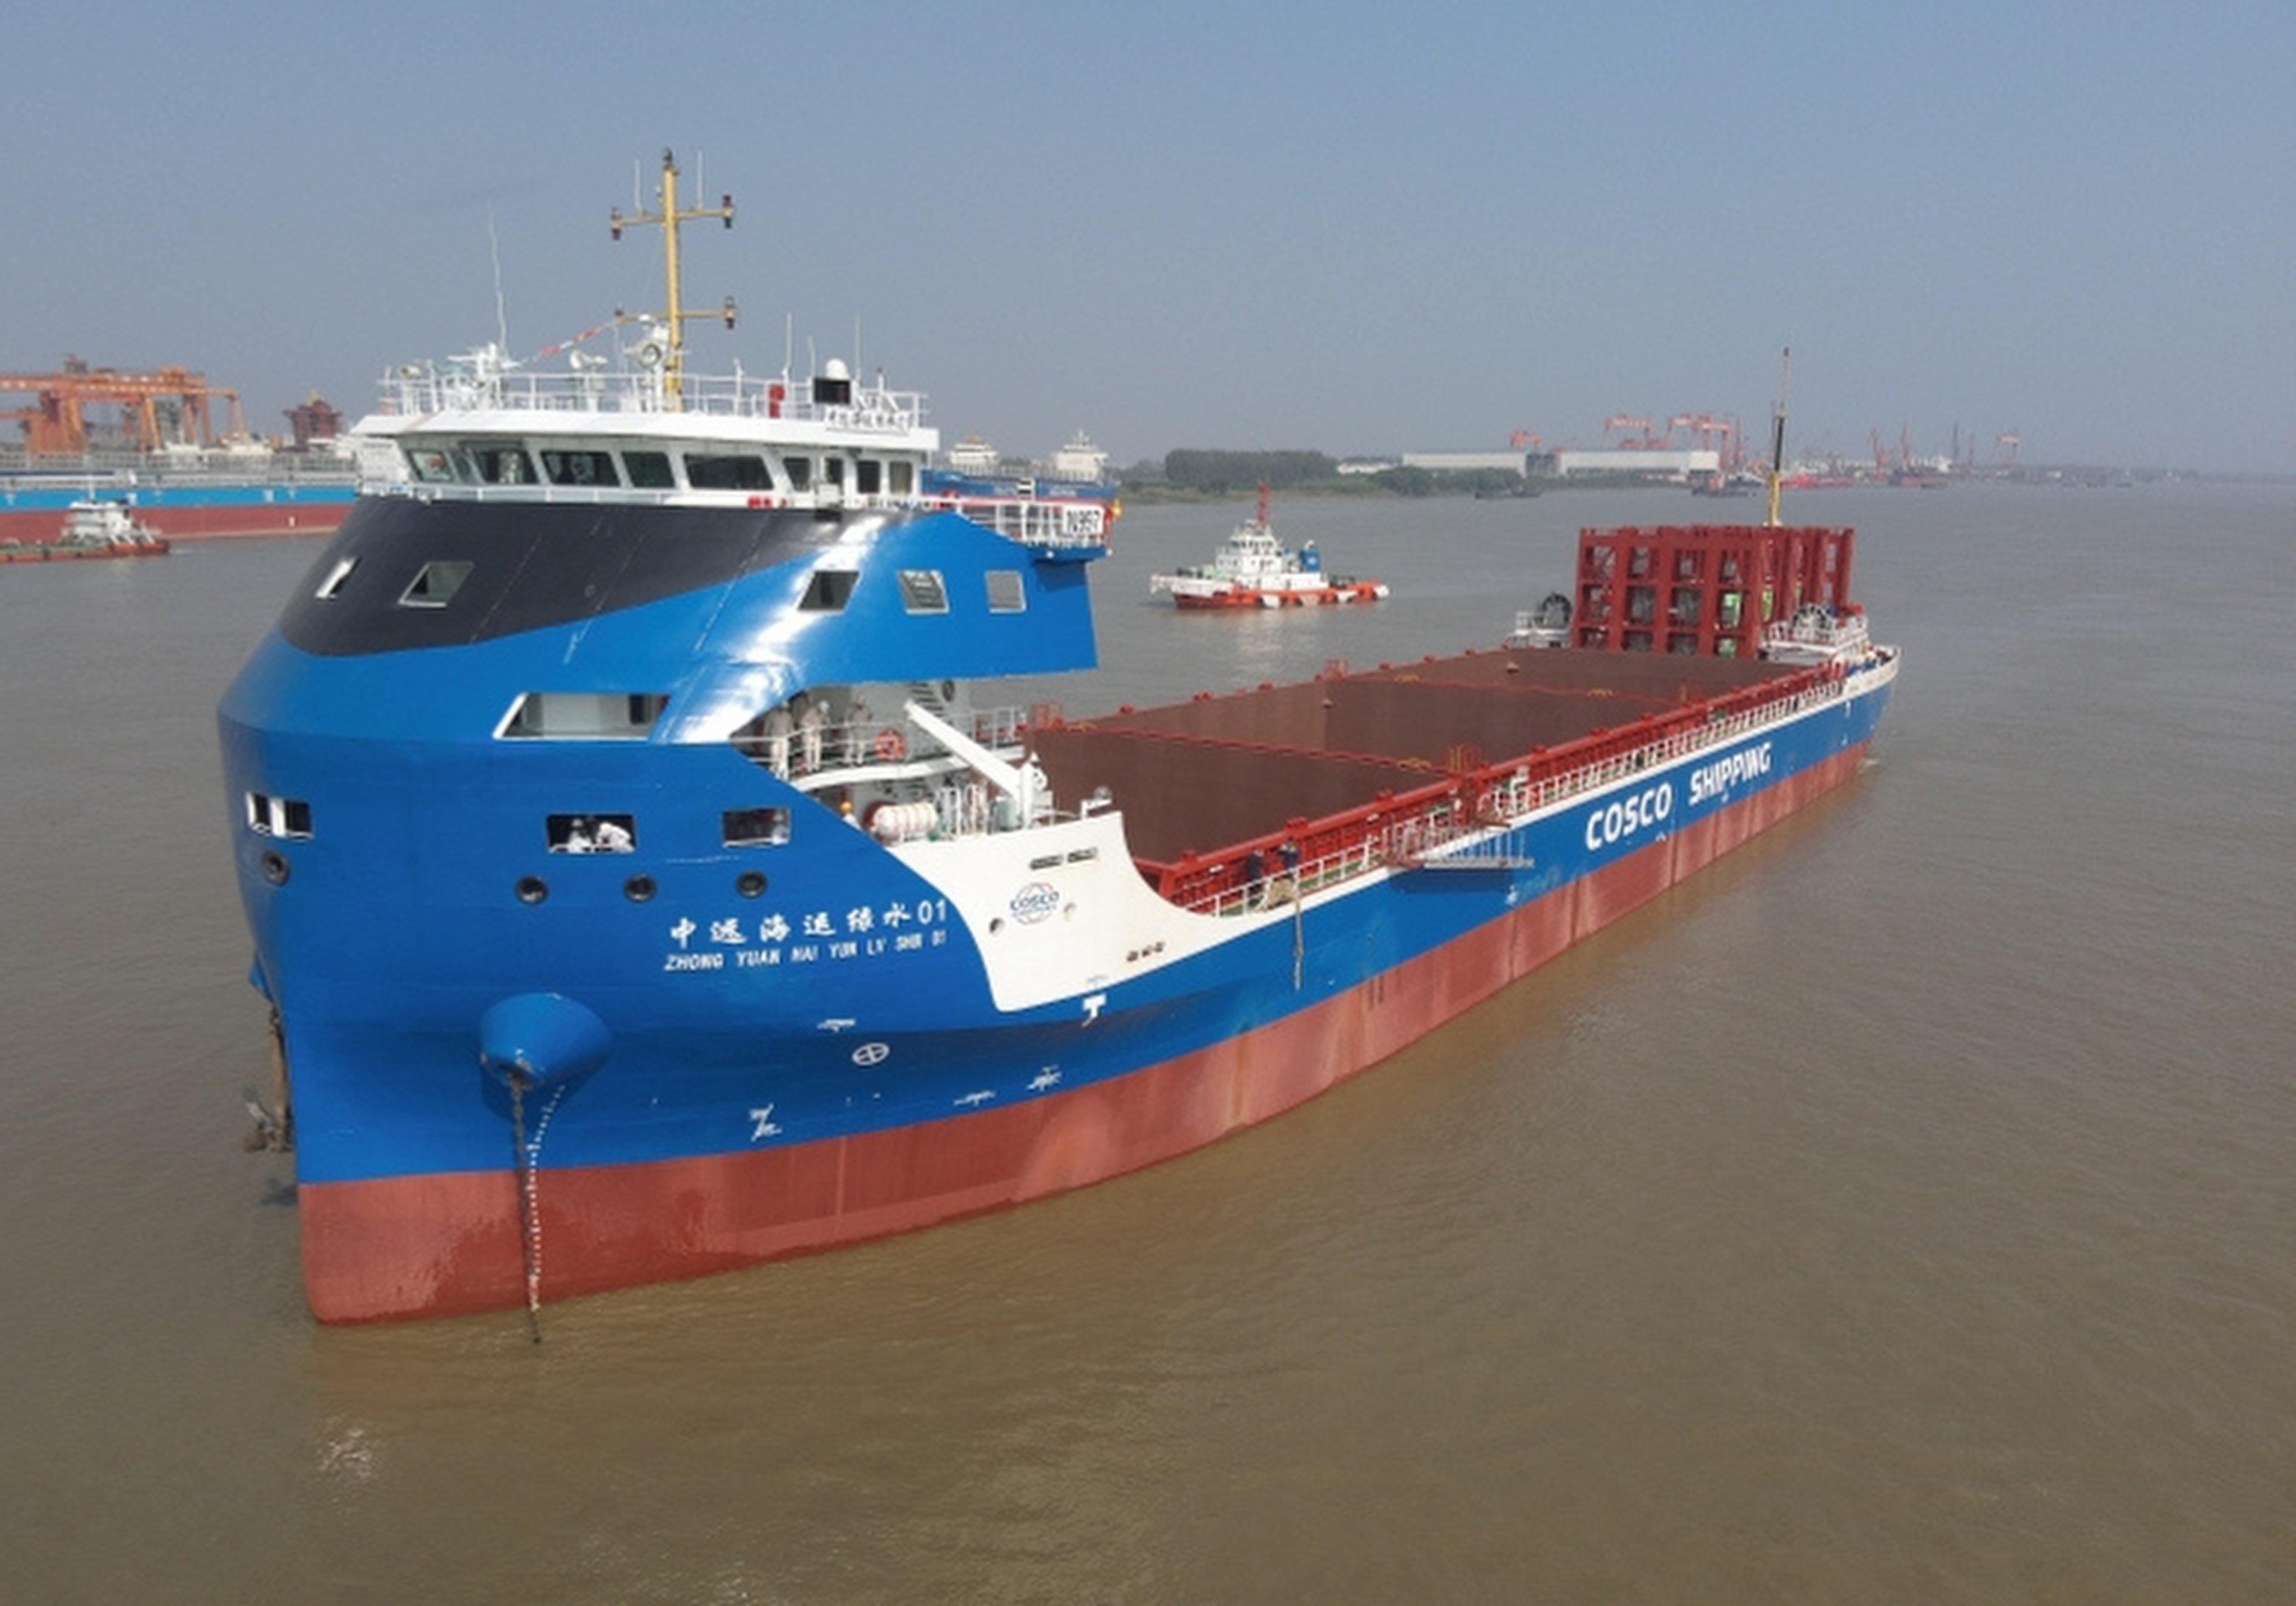 The world’s biggest fully electric container ship built in China by state-owned shipping group Cosco will start a regular weekly service between Shanghai and Nanjing. Photo: Handout